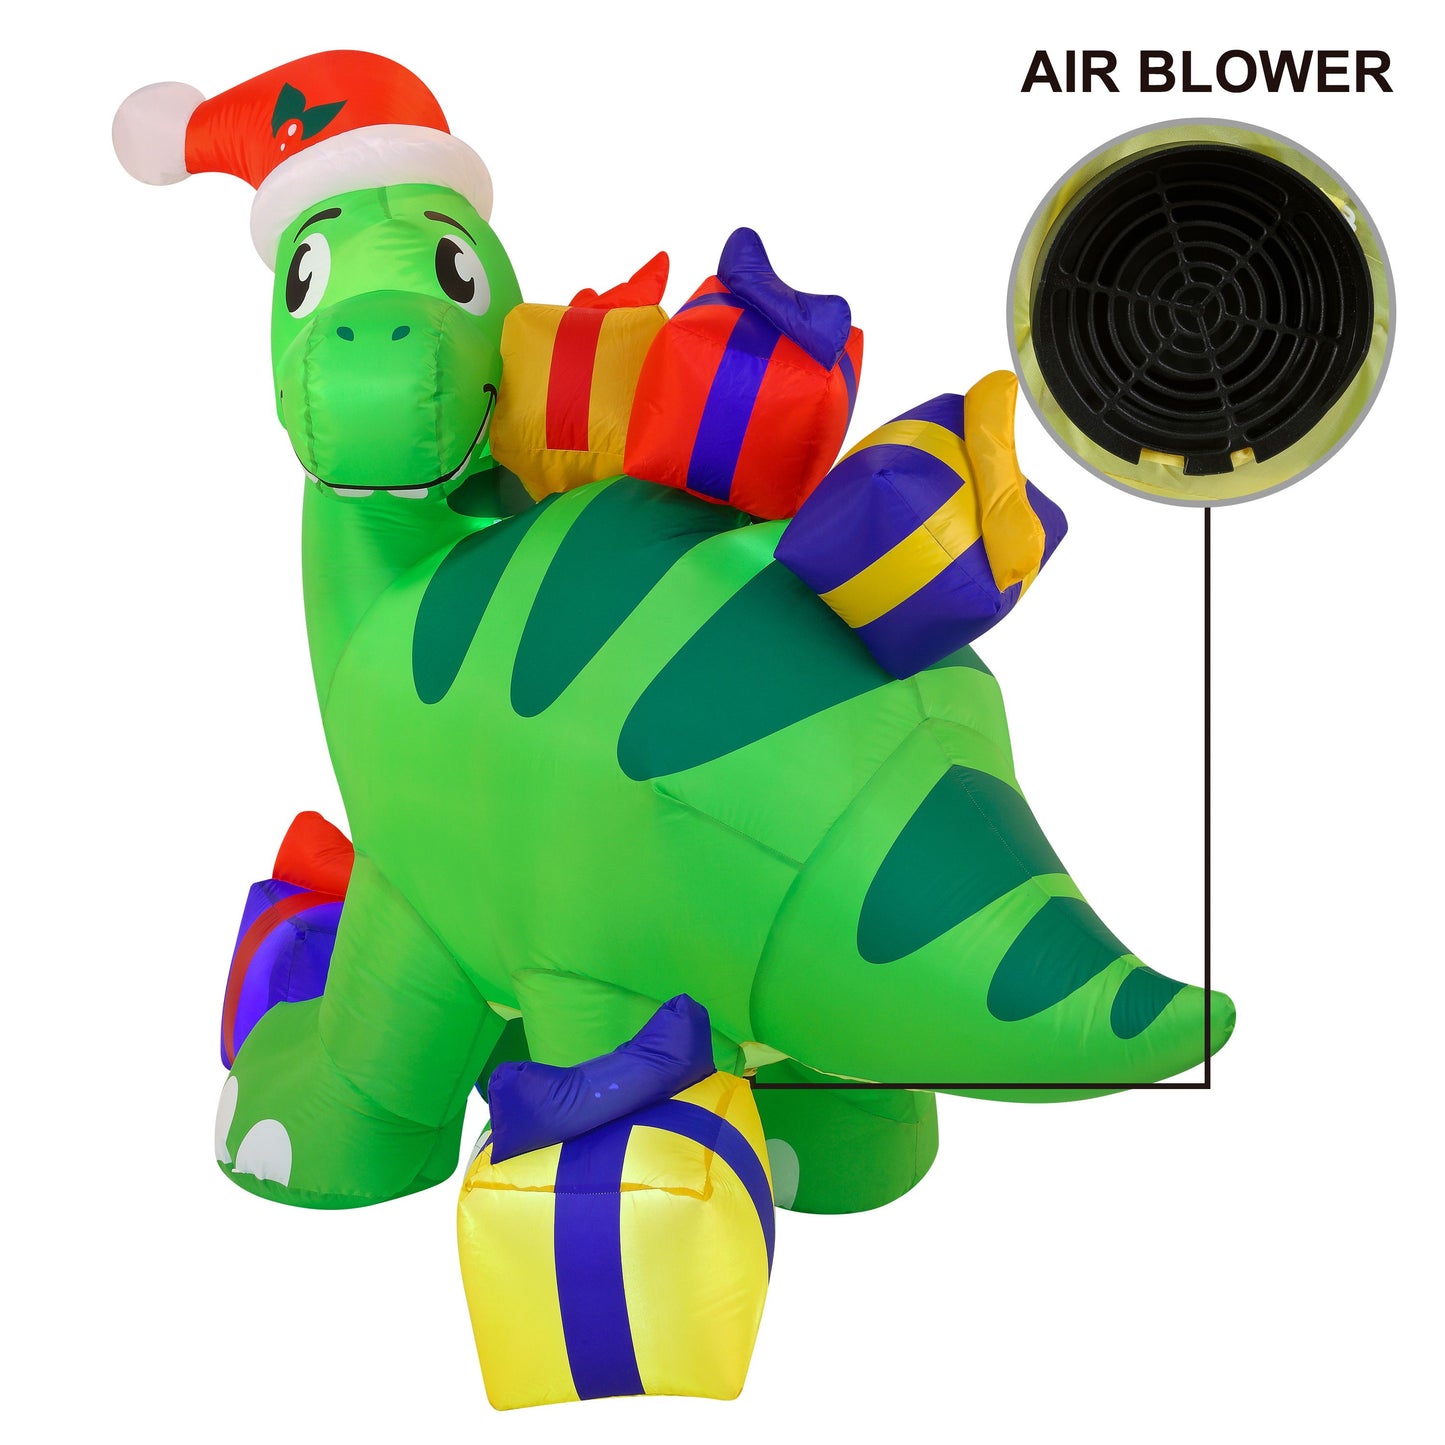 6 FT Long Inflatable Brachiosaurus Carrying Gifts with Build-in LEDs